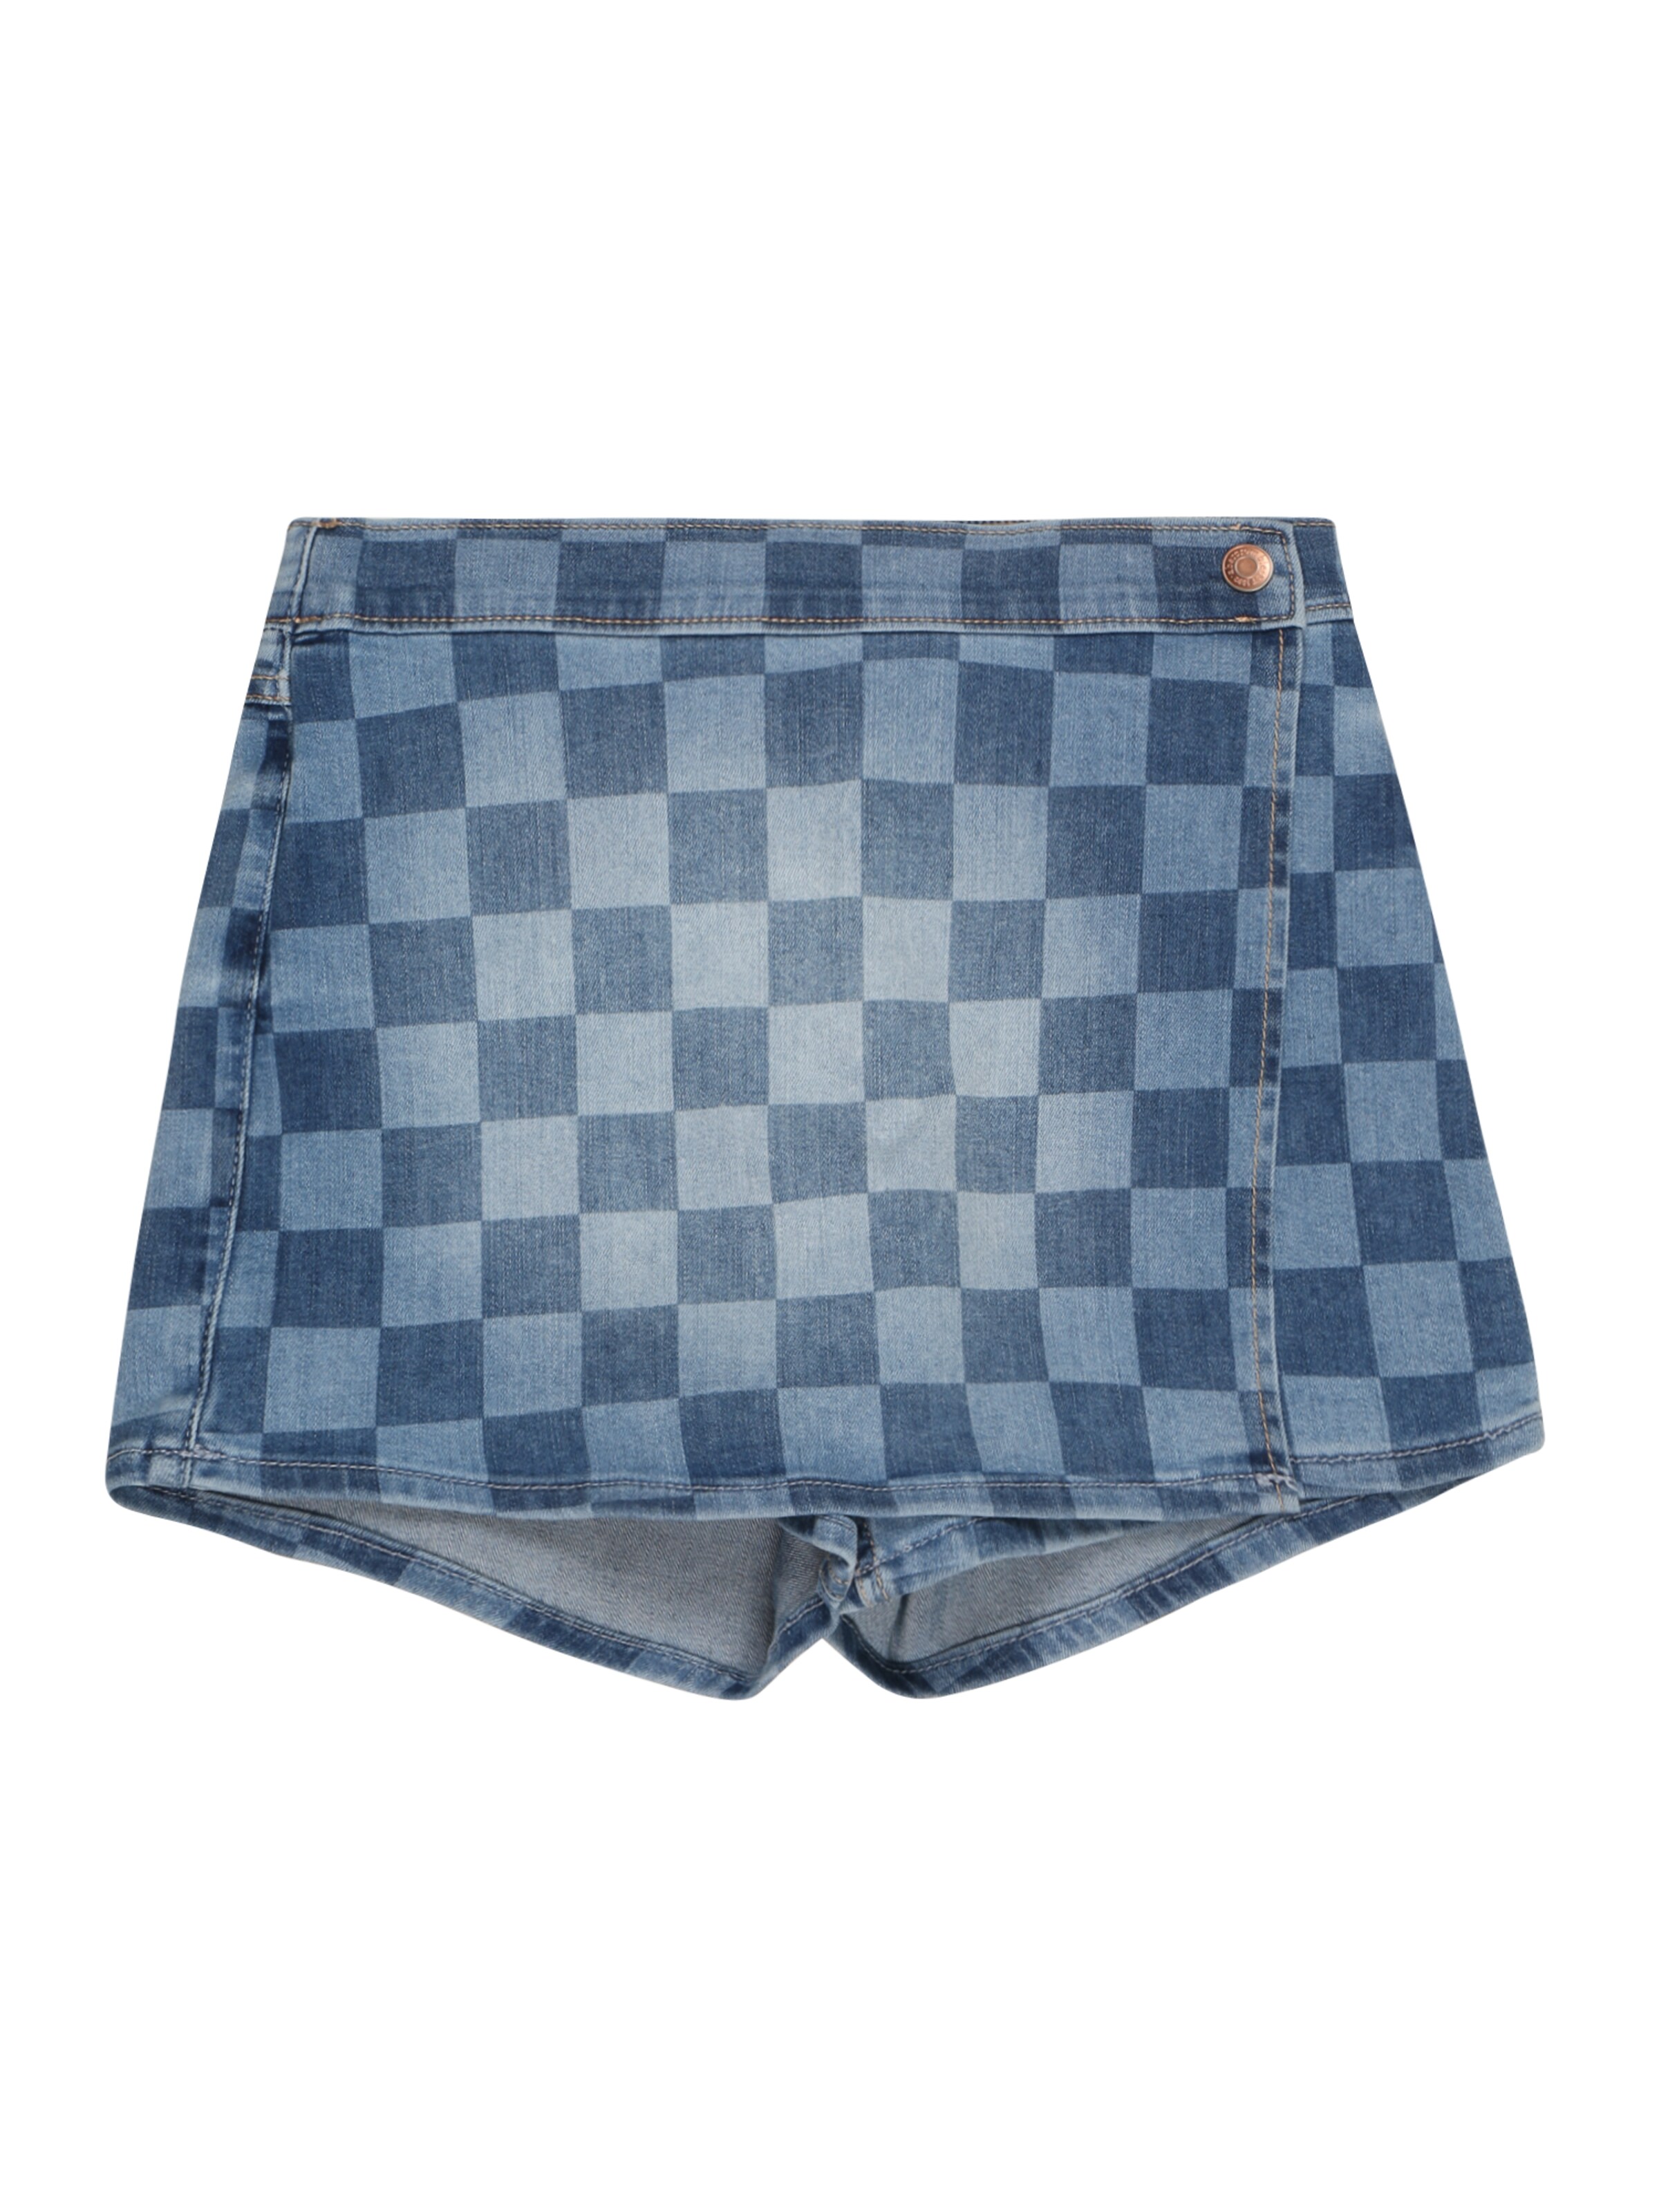 Kinder Teens (Gr. 140-176) Abercrombie & Fitch Shorts in Dunkelblau - AY14336